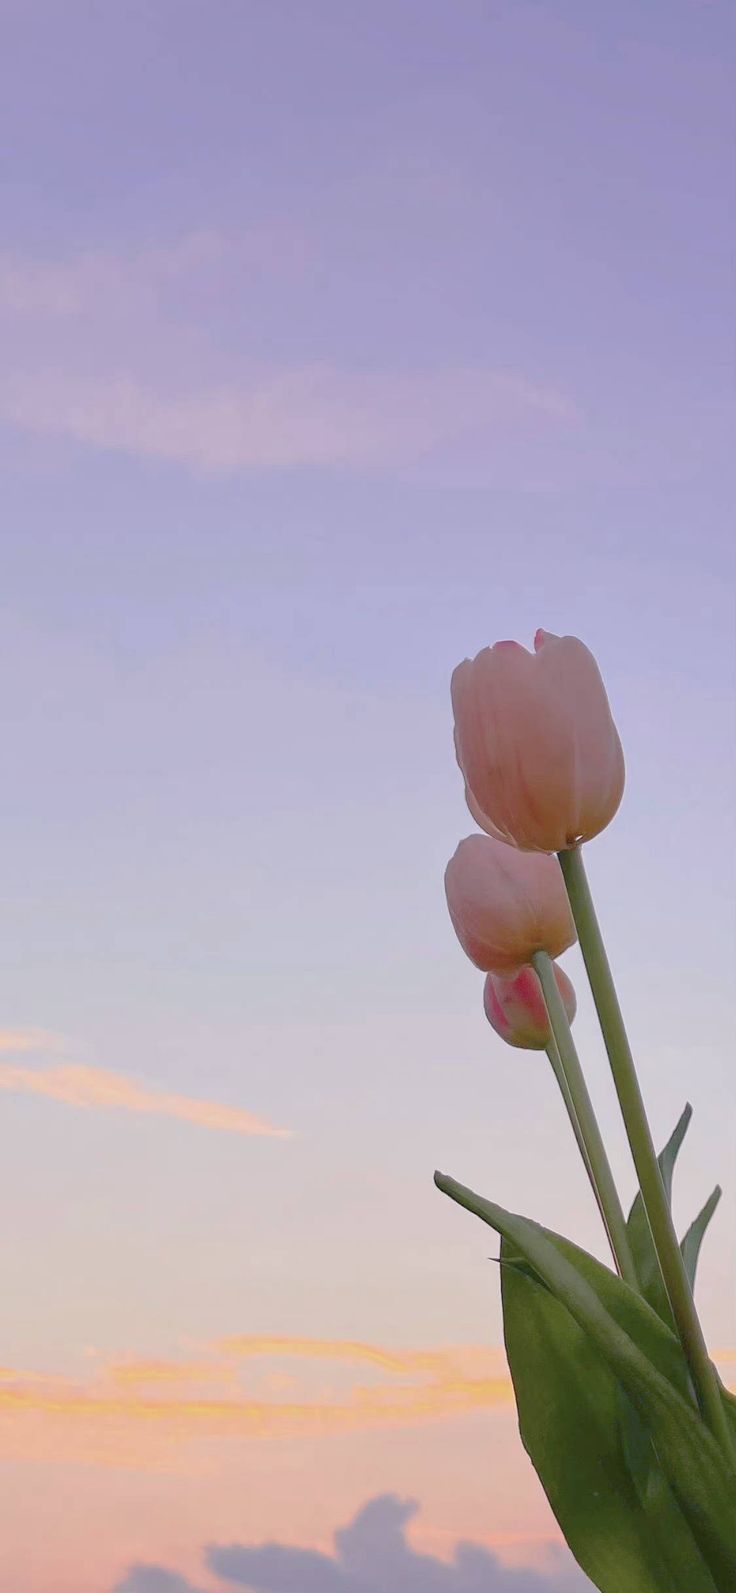 IPhone wallpaper of pink tulips with a purple and blue sunset sky - Tulip